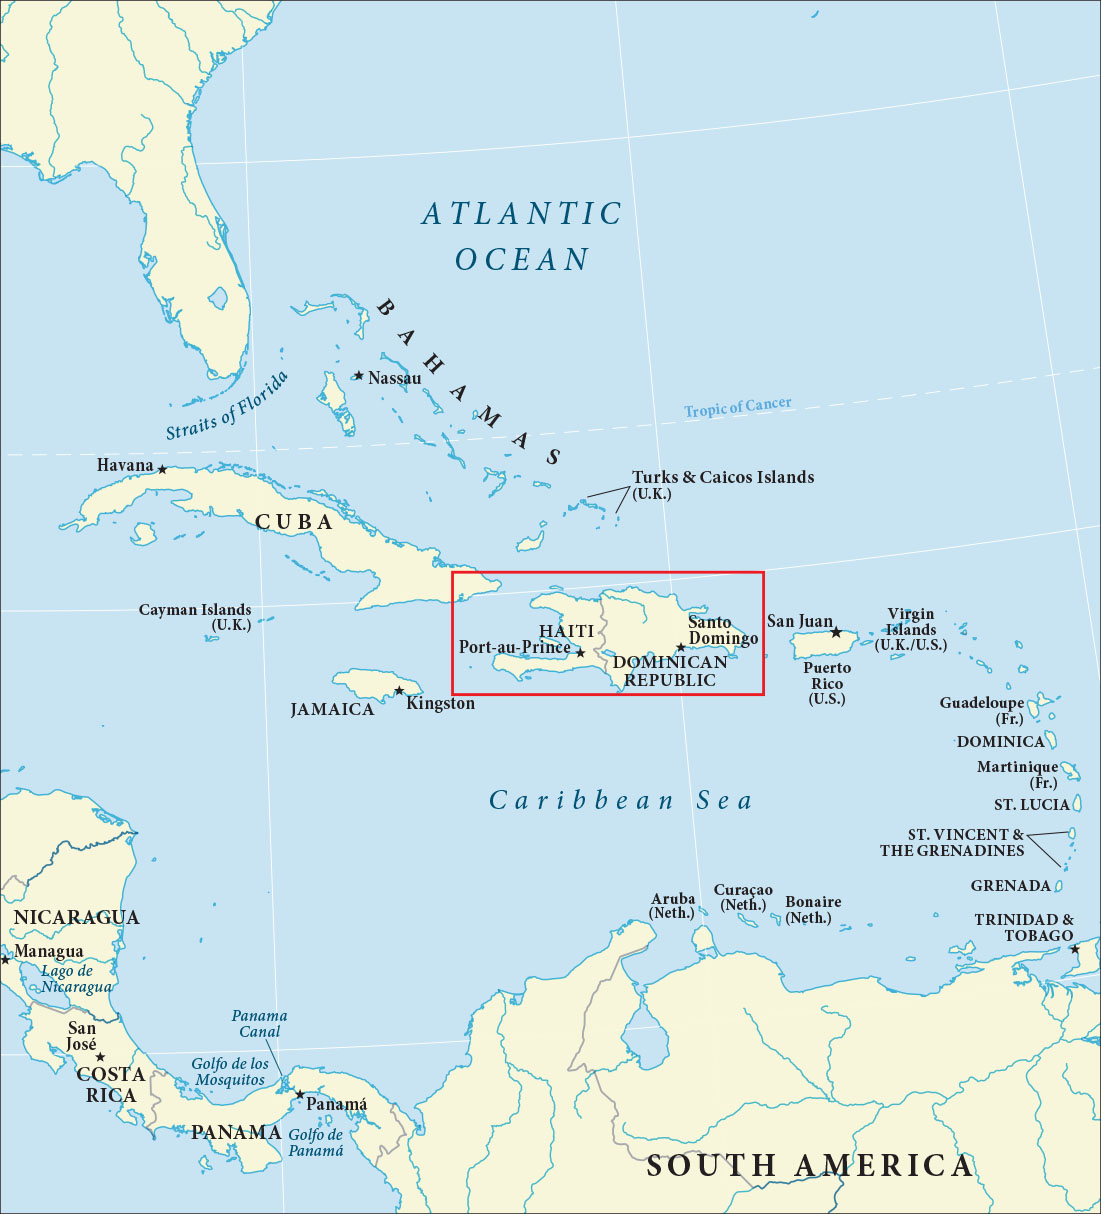 This map is centered on the island of Hispaniola in the Caribbean Sea. The island includes Haiti and the Dominican Republic. Florida is visible to the northwest. Cuba and Jamaica are to the west. Puerto Rico is to the east. South America is directly south of Hispaniola.